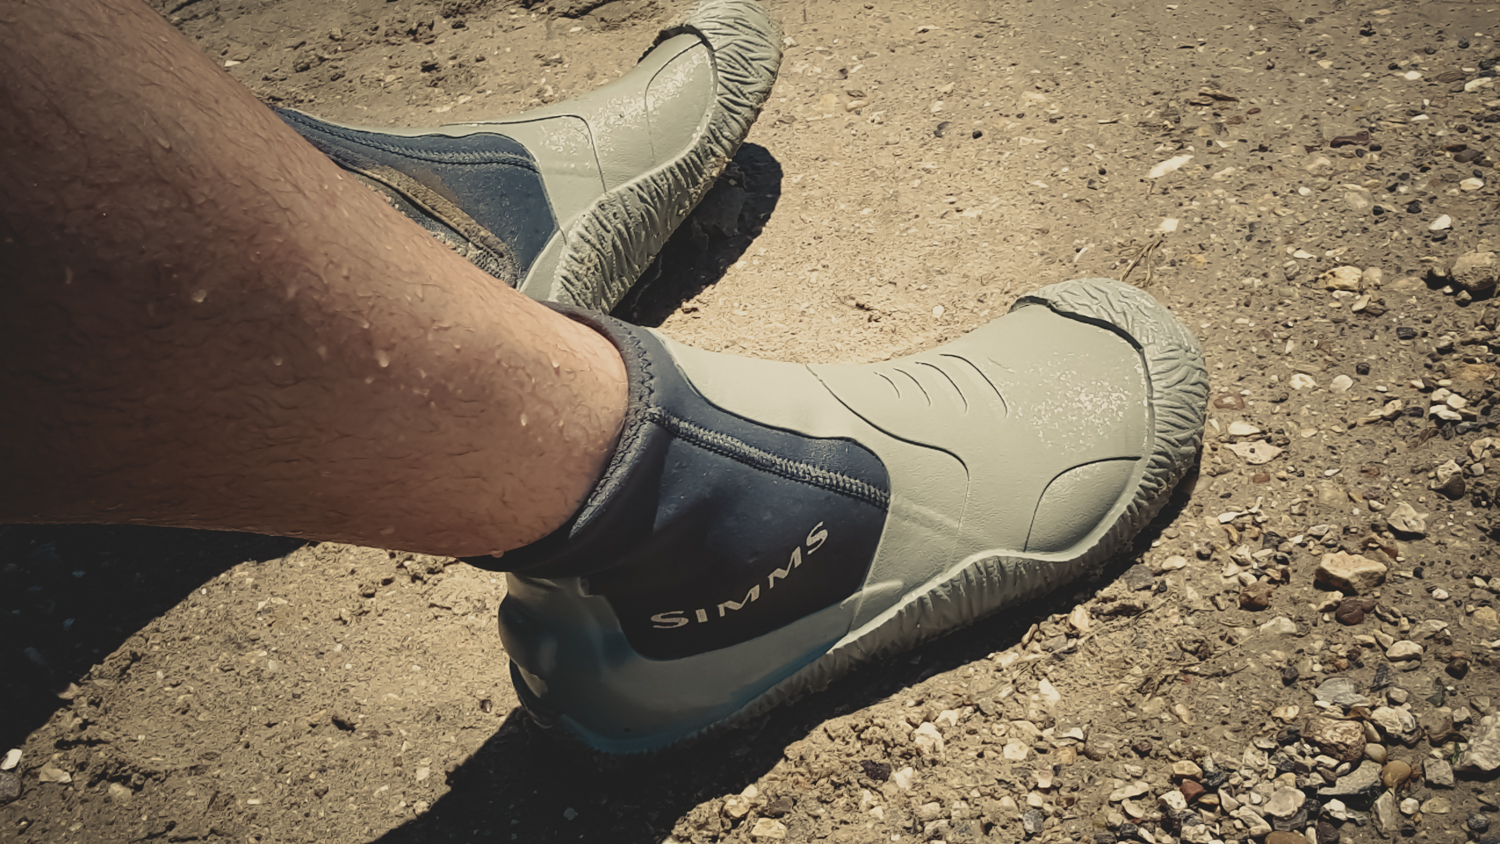 Review: Simms ZipIt Bootie II | Hatch Magazine - Fly Fishing, etc.